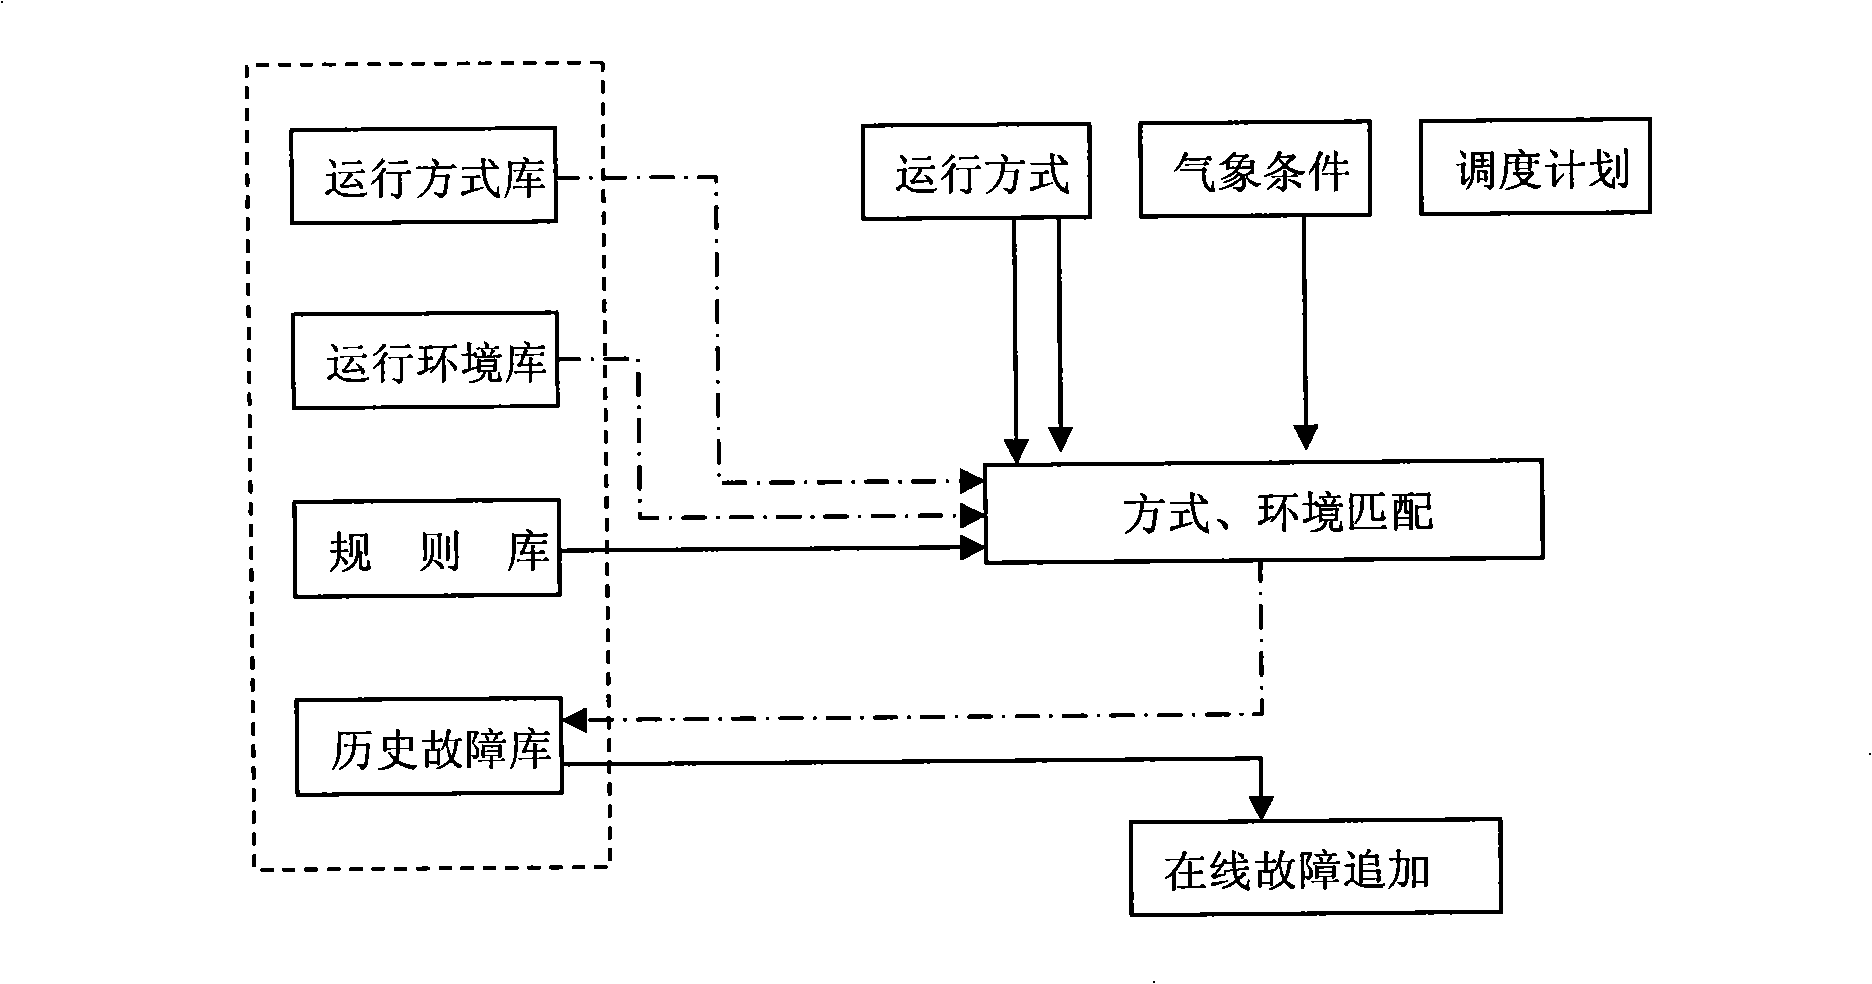 Integrated coordinating control method for security stabilization early warning, preventing control and emergency control